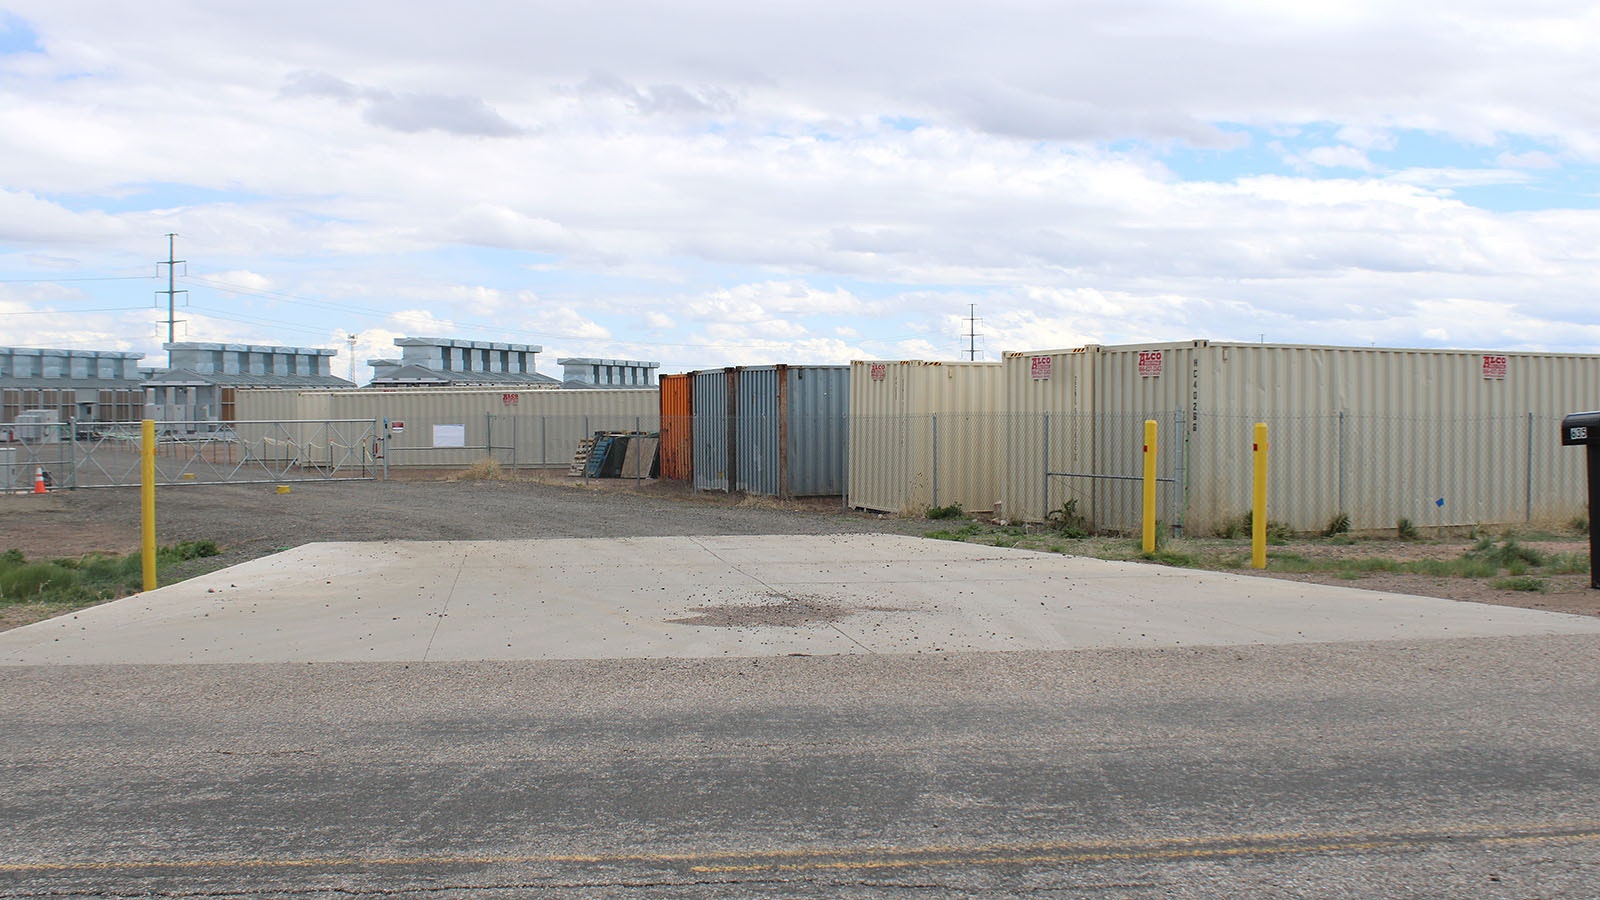 The MineOne Chinese bitcoin operation banned last week and ordered by President Joe Biden to shut down and sell off already is staging to clear out with large turcks and storage pods staged at the site, which is about a mile from F.E. Warren Air Force Base.